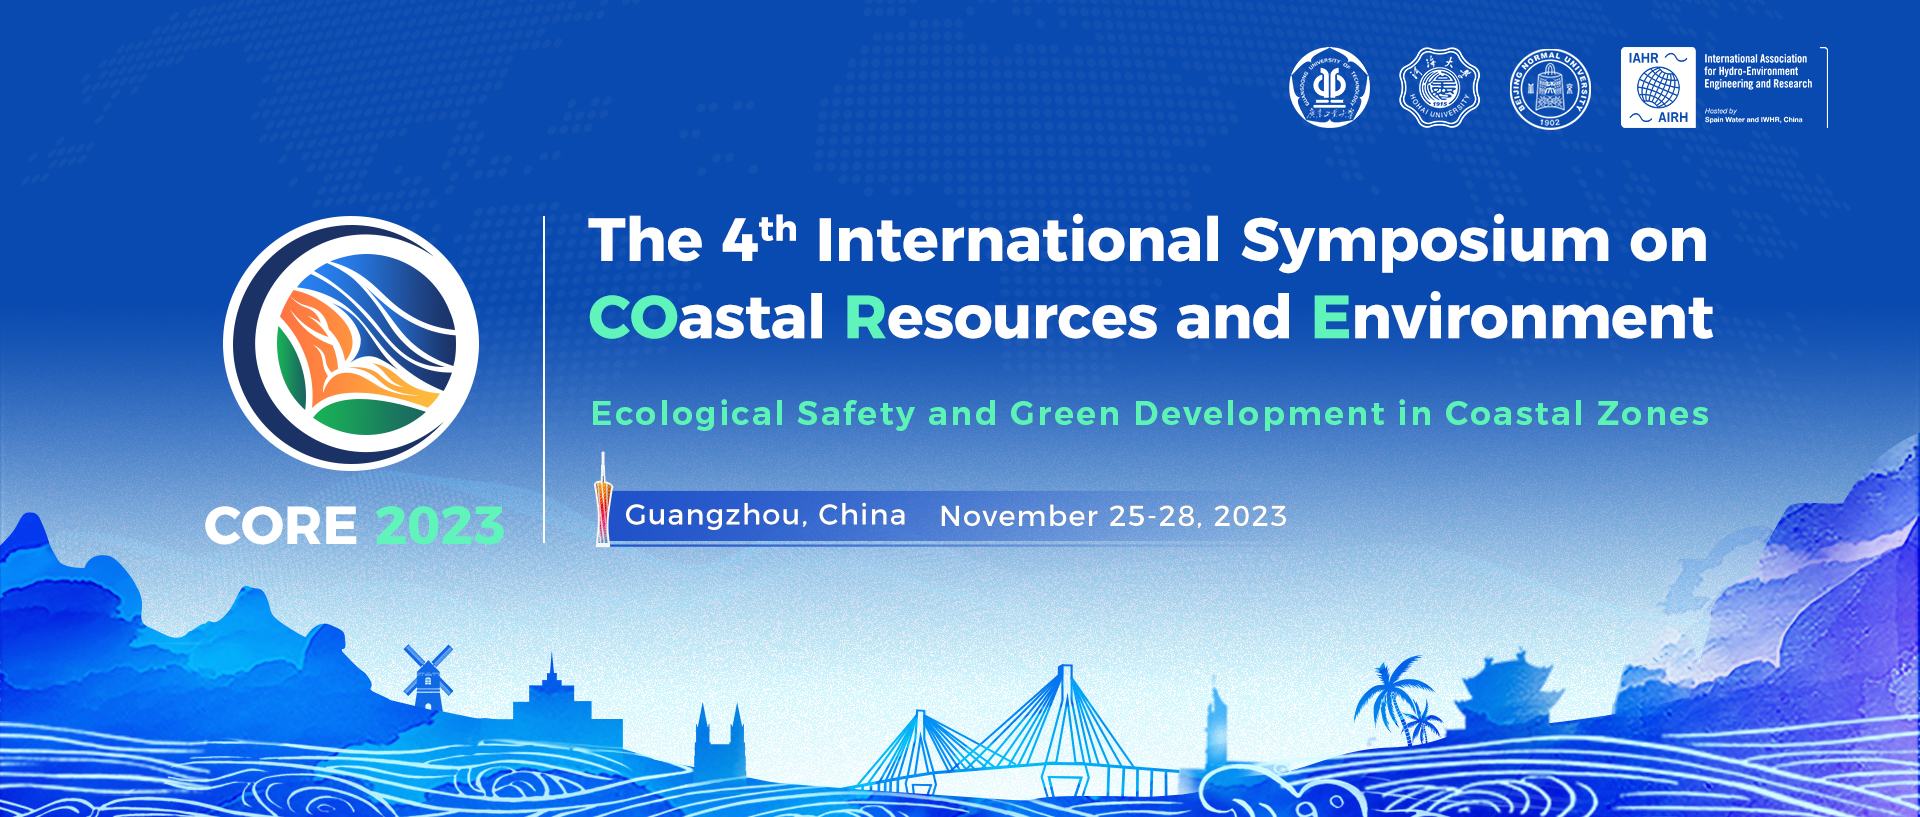 The 4th International Symposium on Coastal Resources and Environment Ecological Safety and Green Development in Coastal Zones